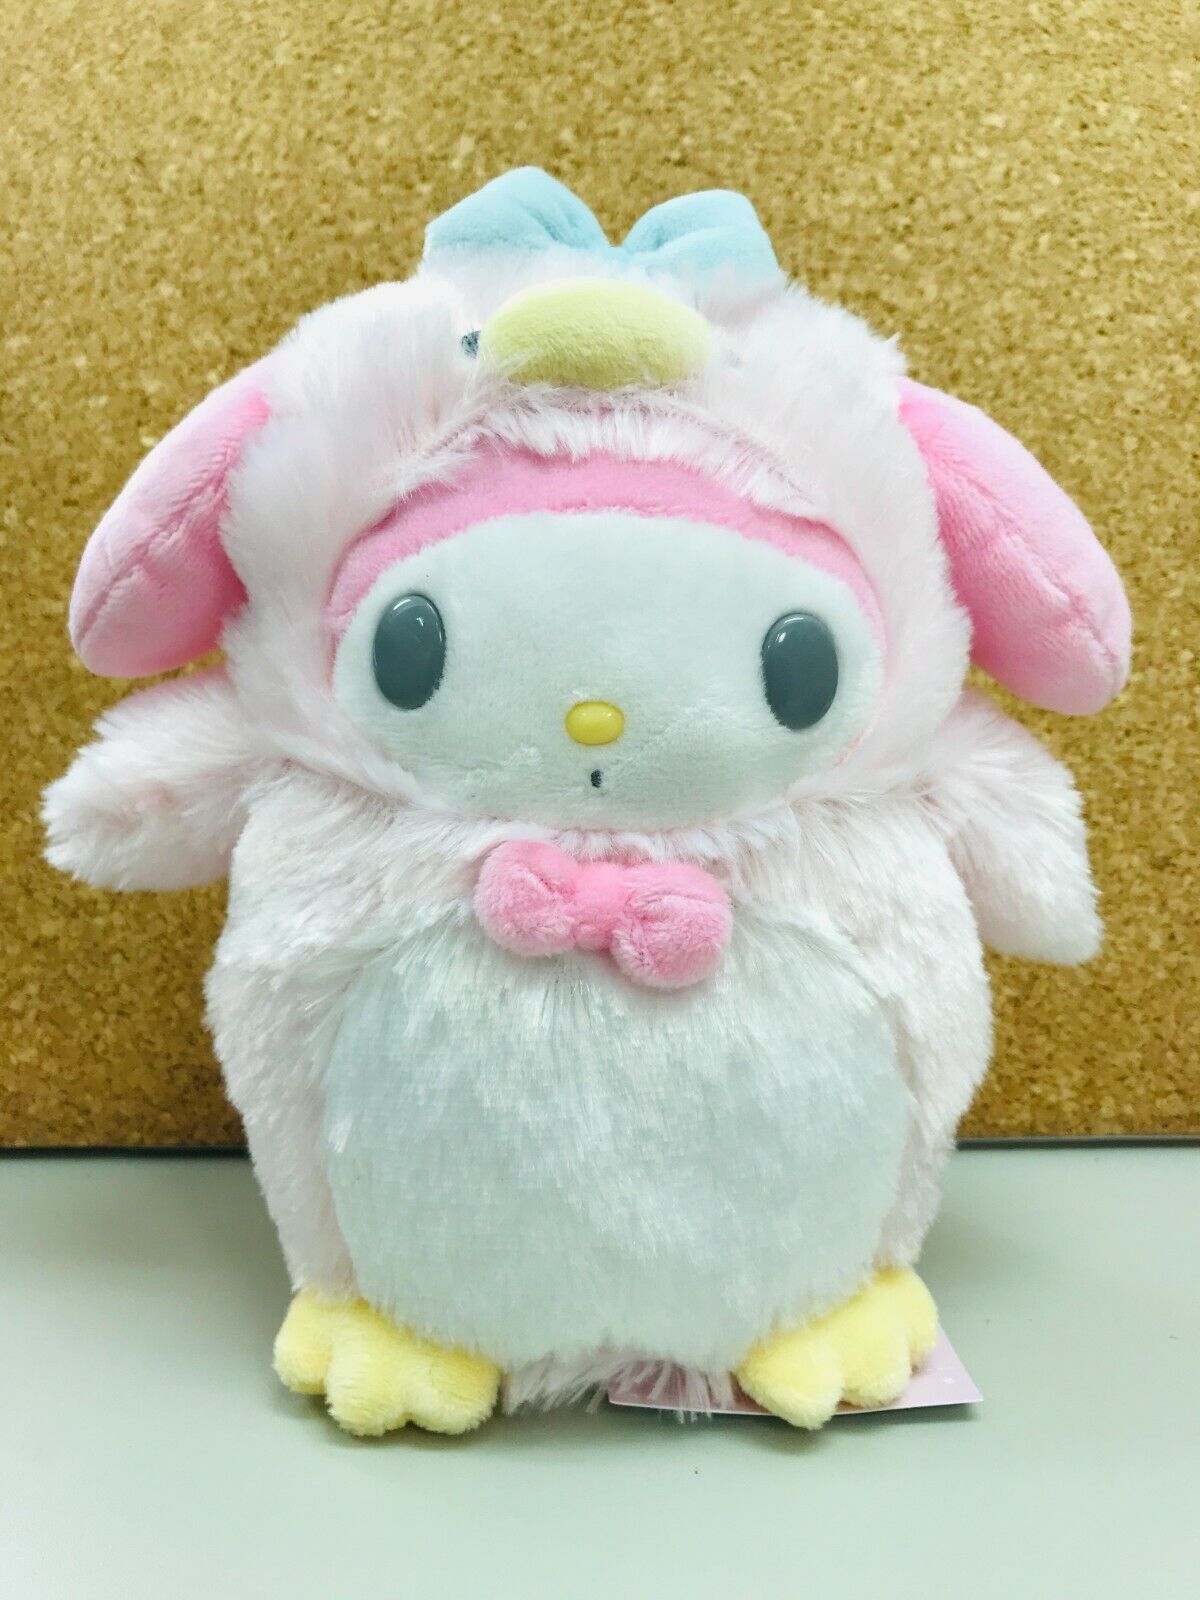 Sanrio Character My Melody Stuffed Toy Pink Penguin design Plush Doll Gift Japan